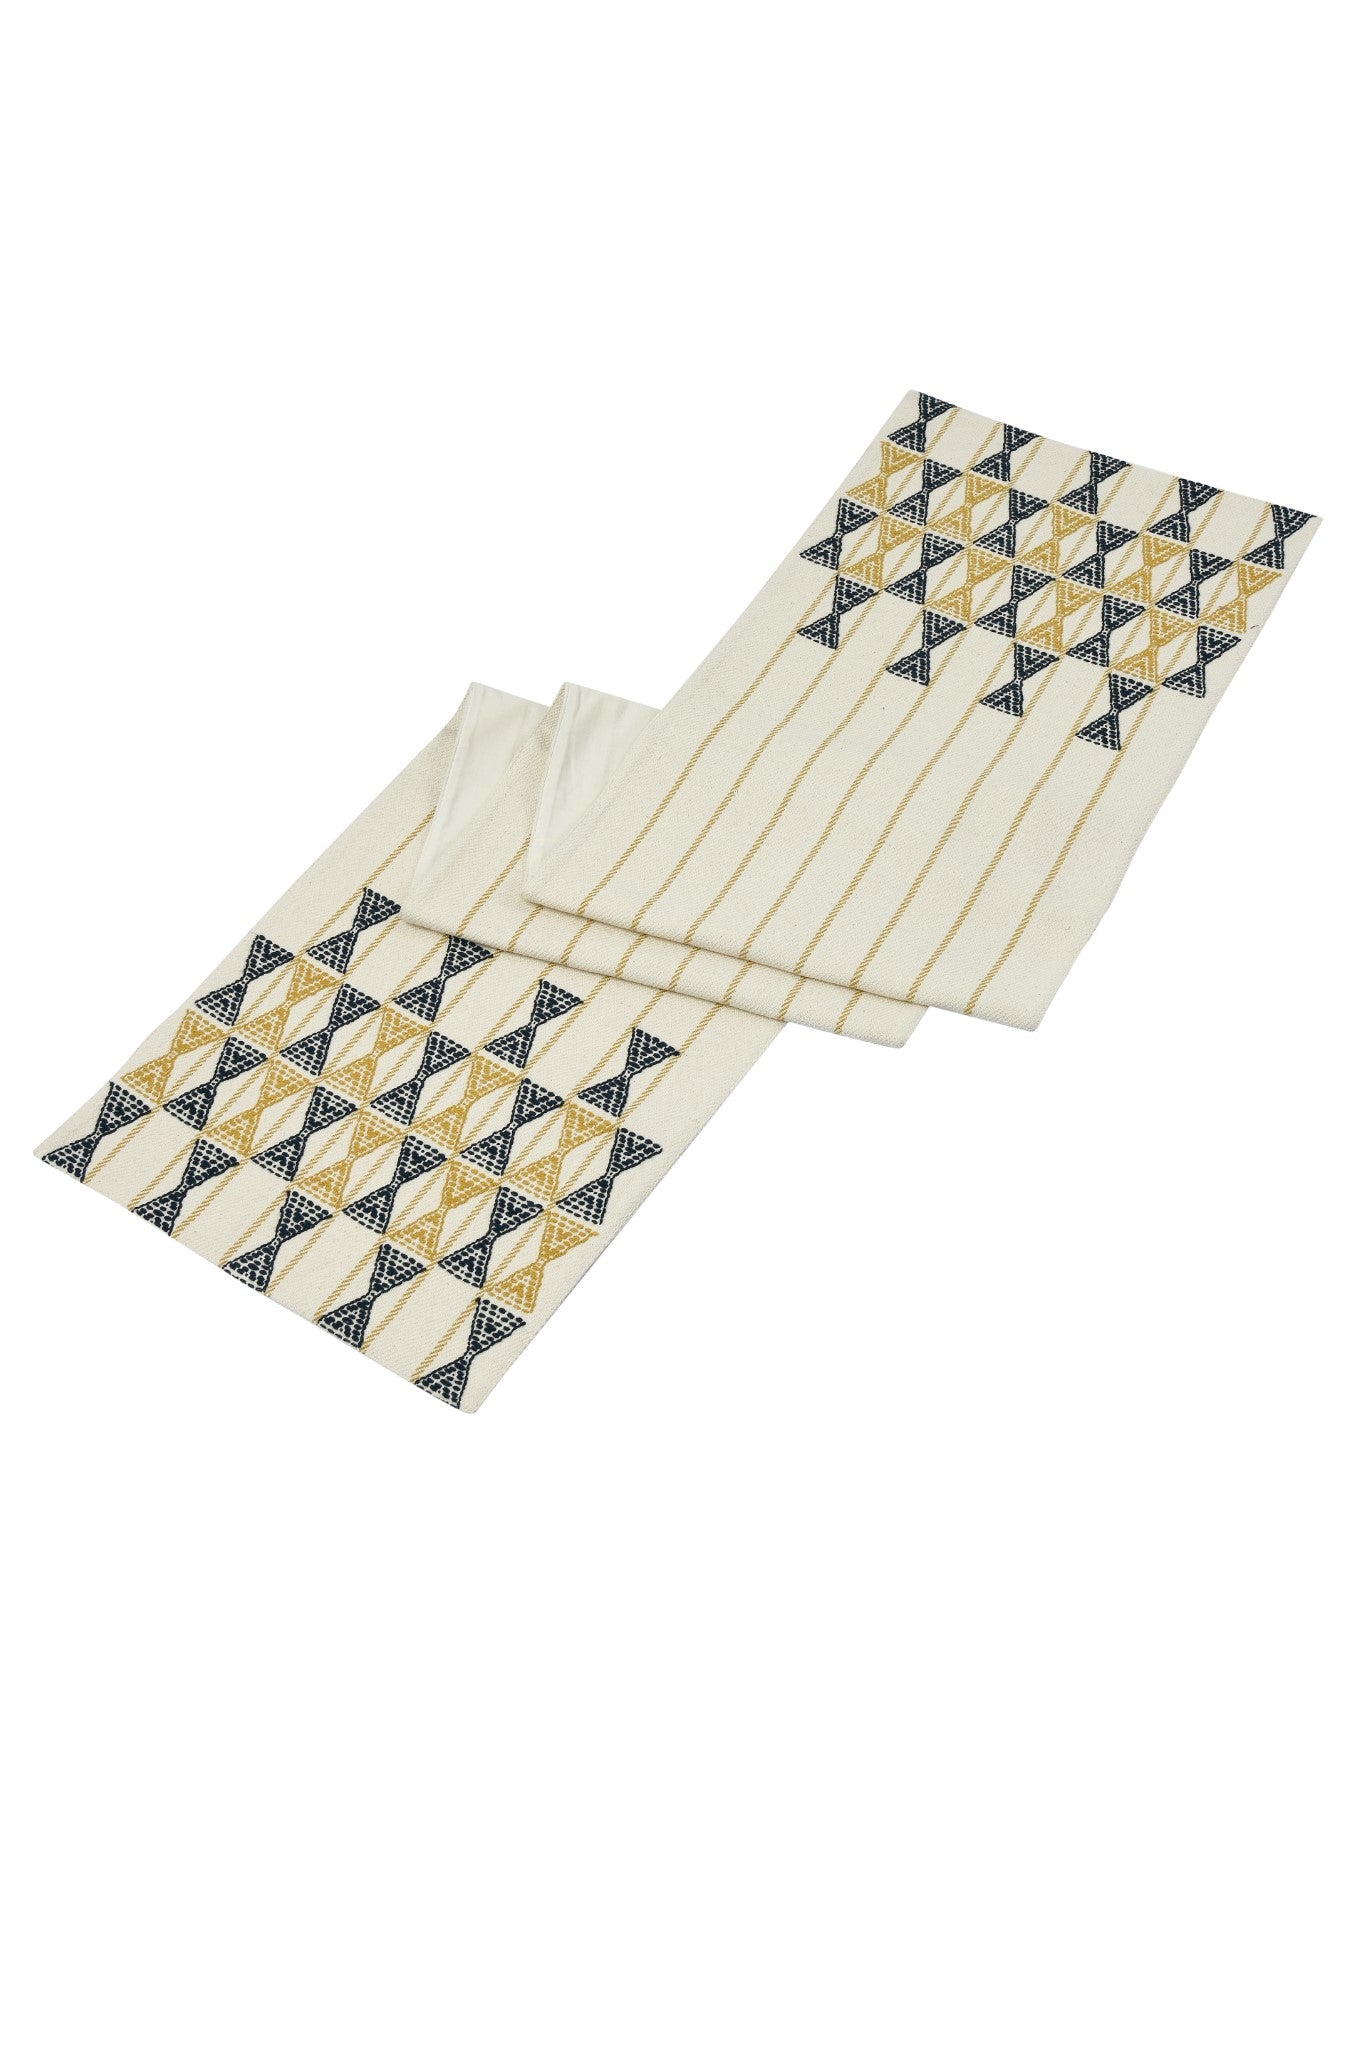 Extra weft table runner in neutral, mustard and navy